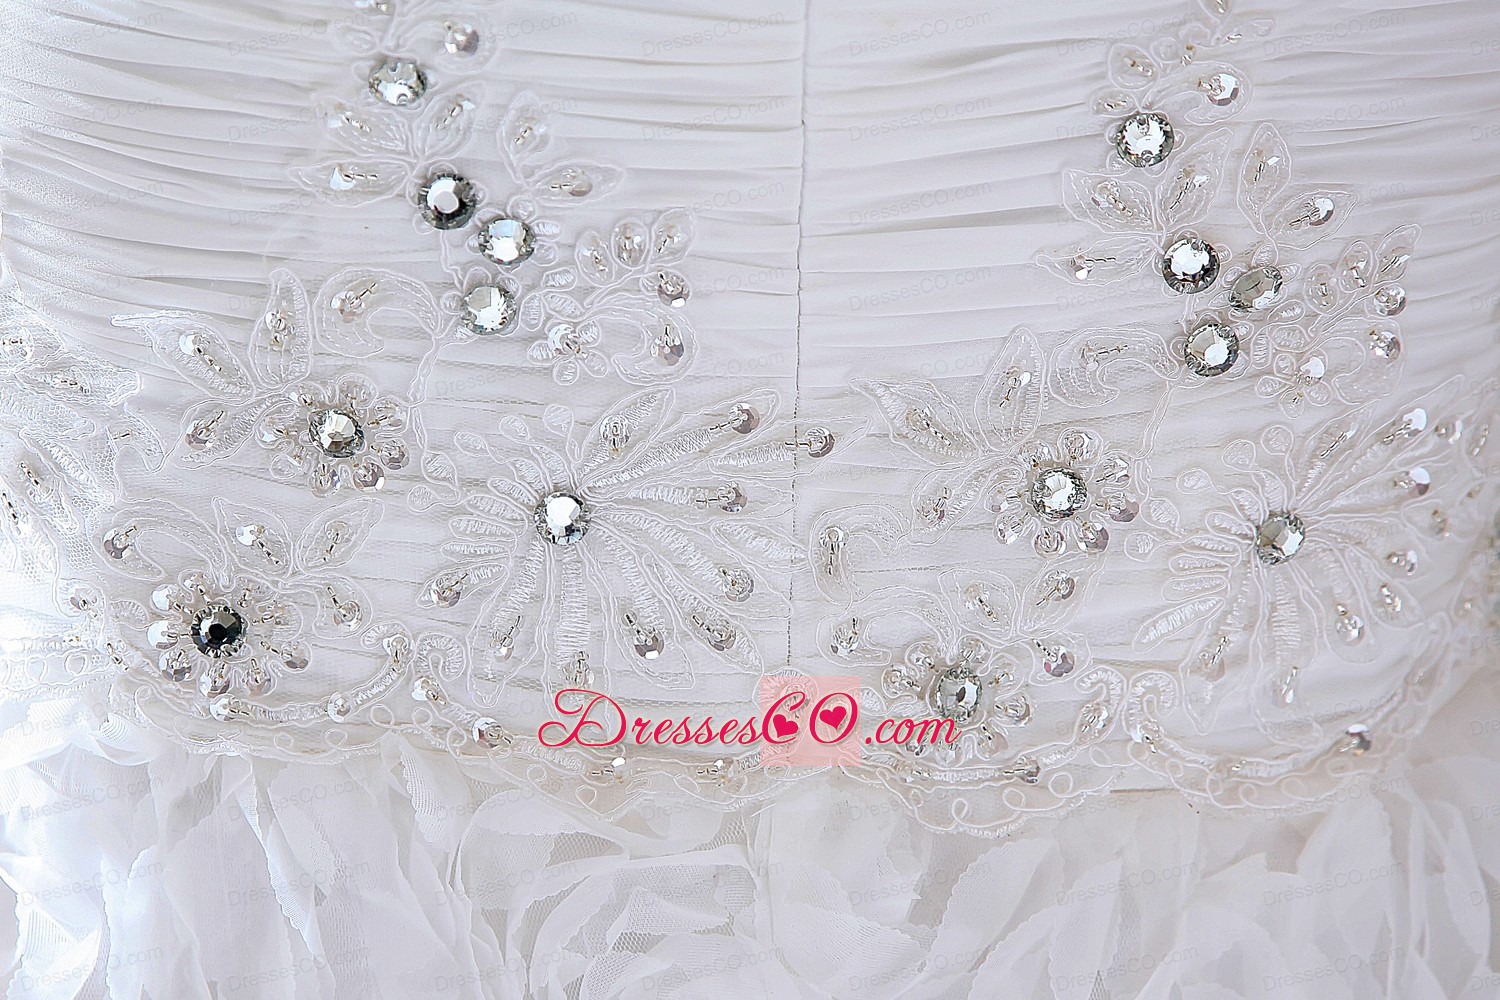 Gorgeous Mermaid Strapless Court Train Special Fabric Beading and Appliques Wedding Dress